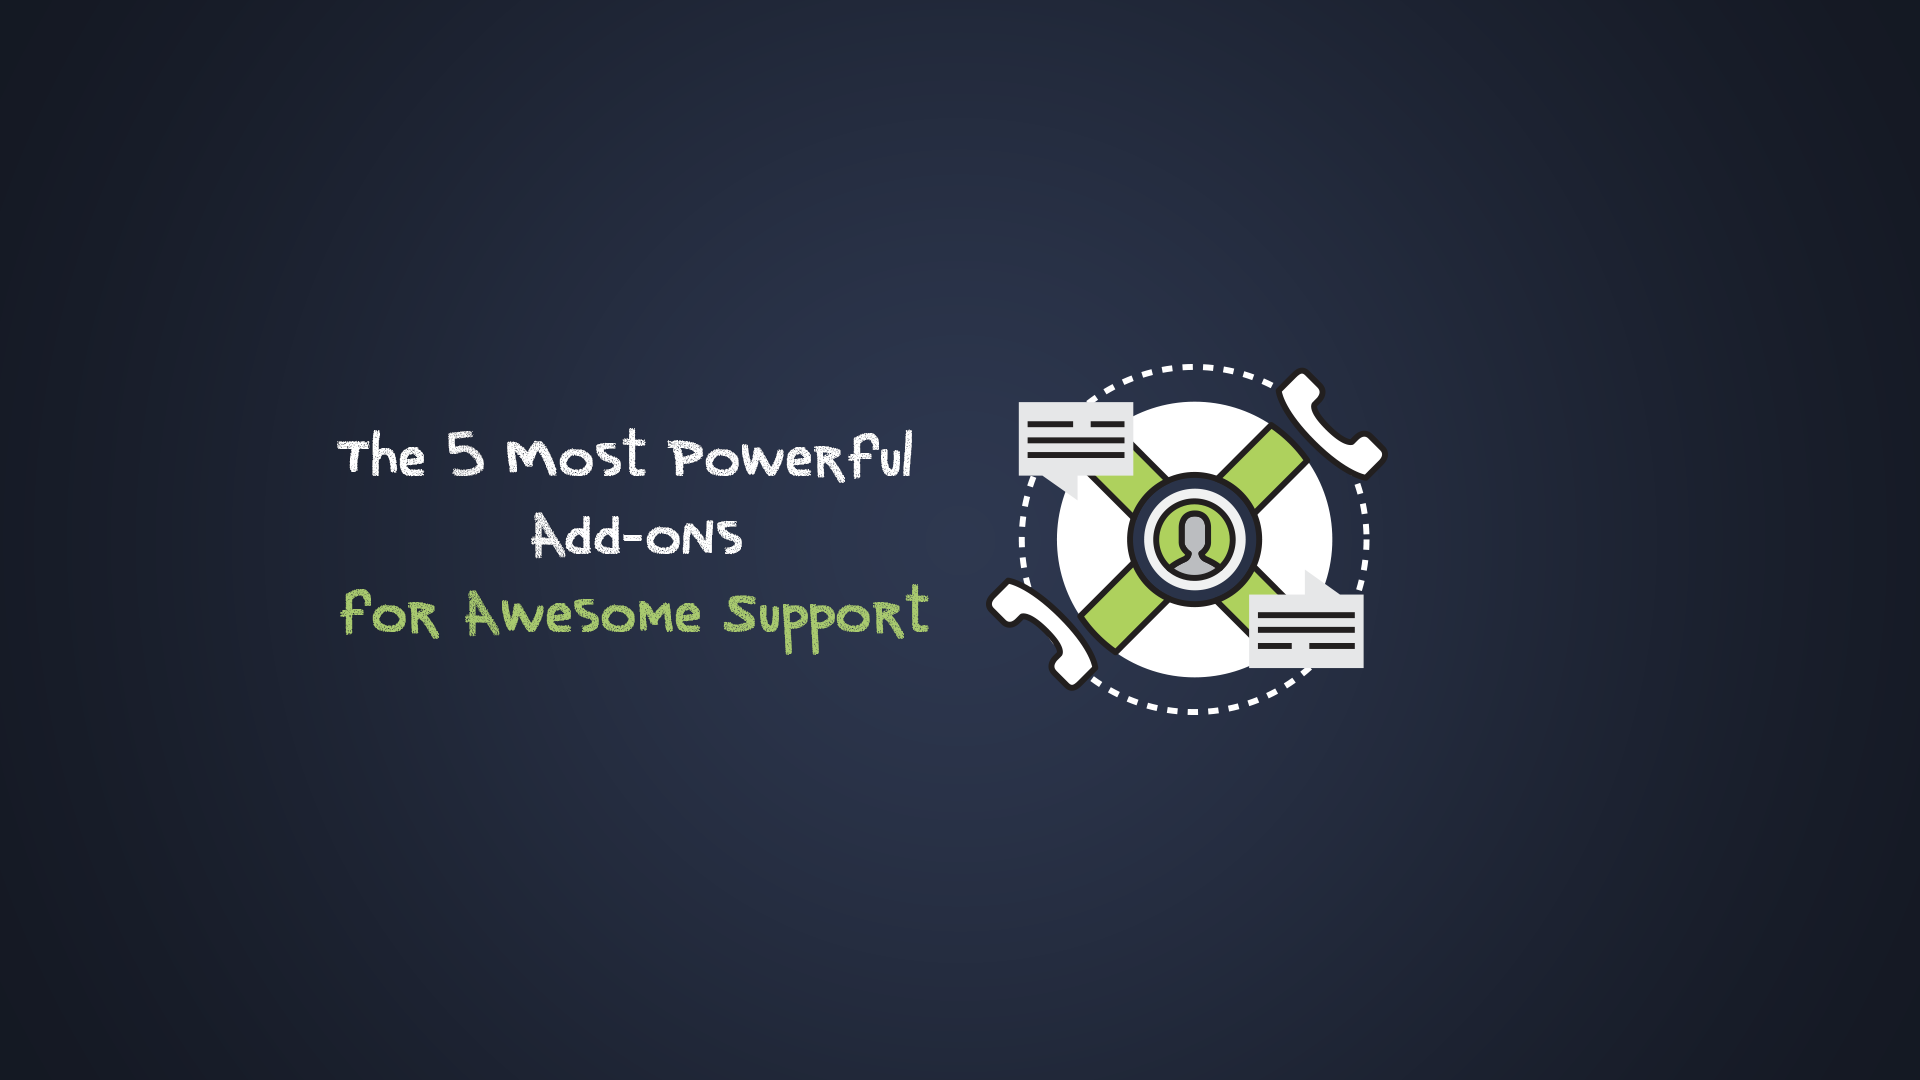 The 5 Most Powerful Add-ons For Awesome Support